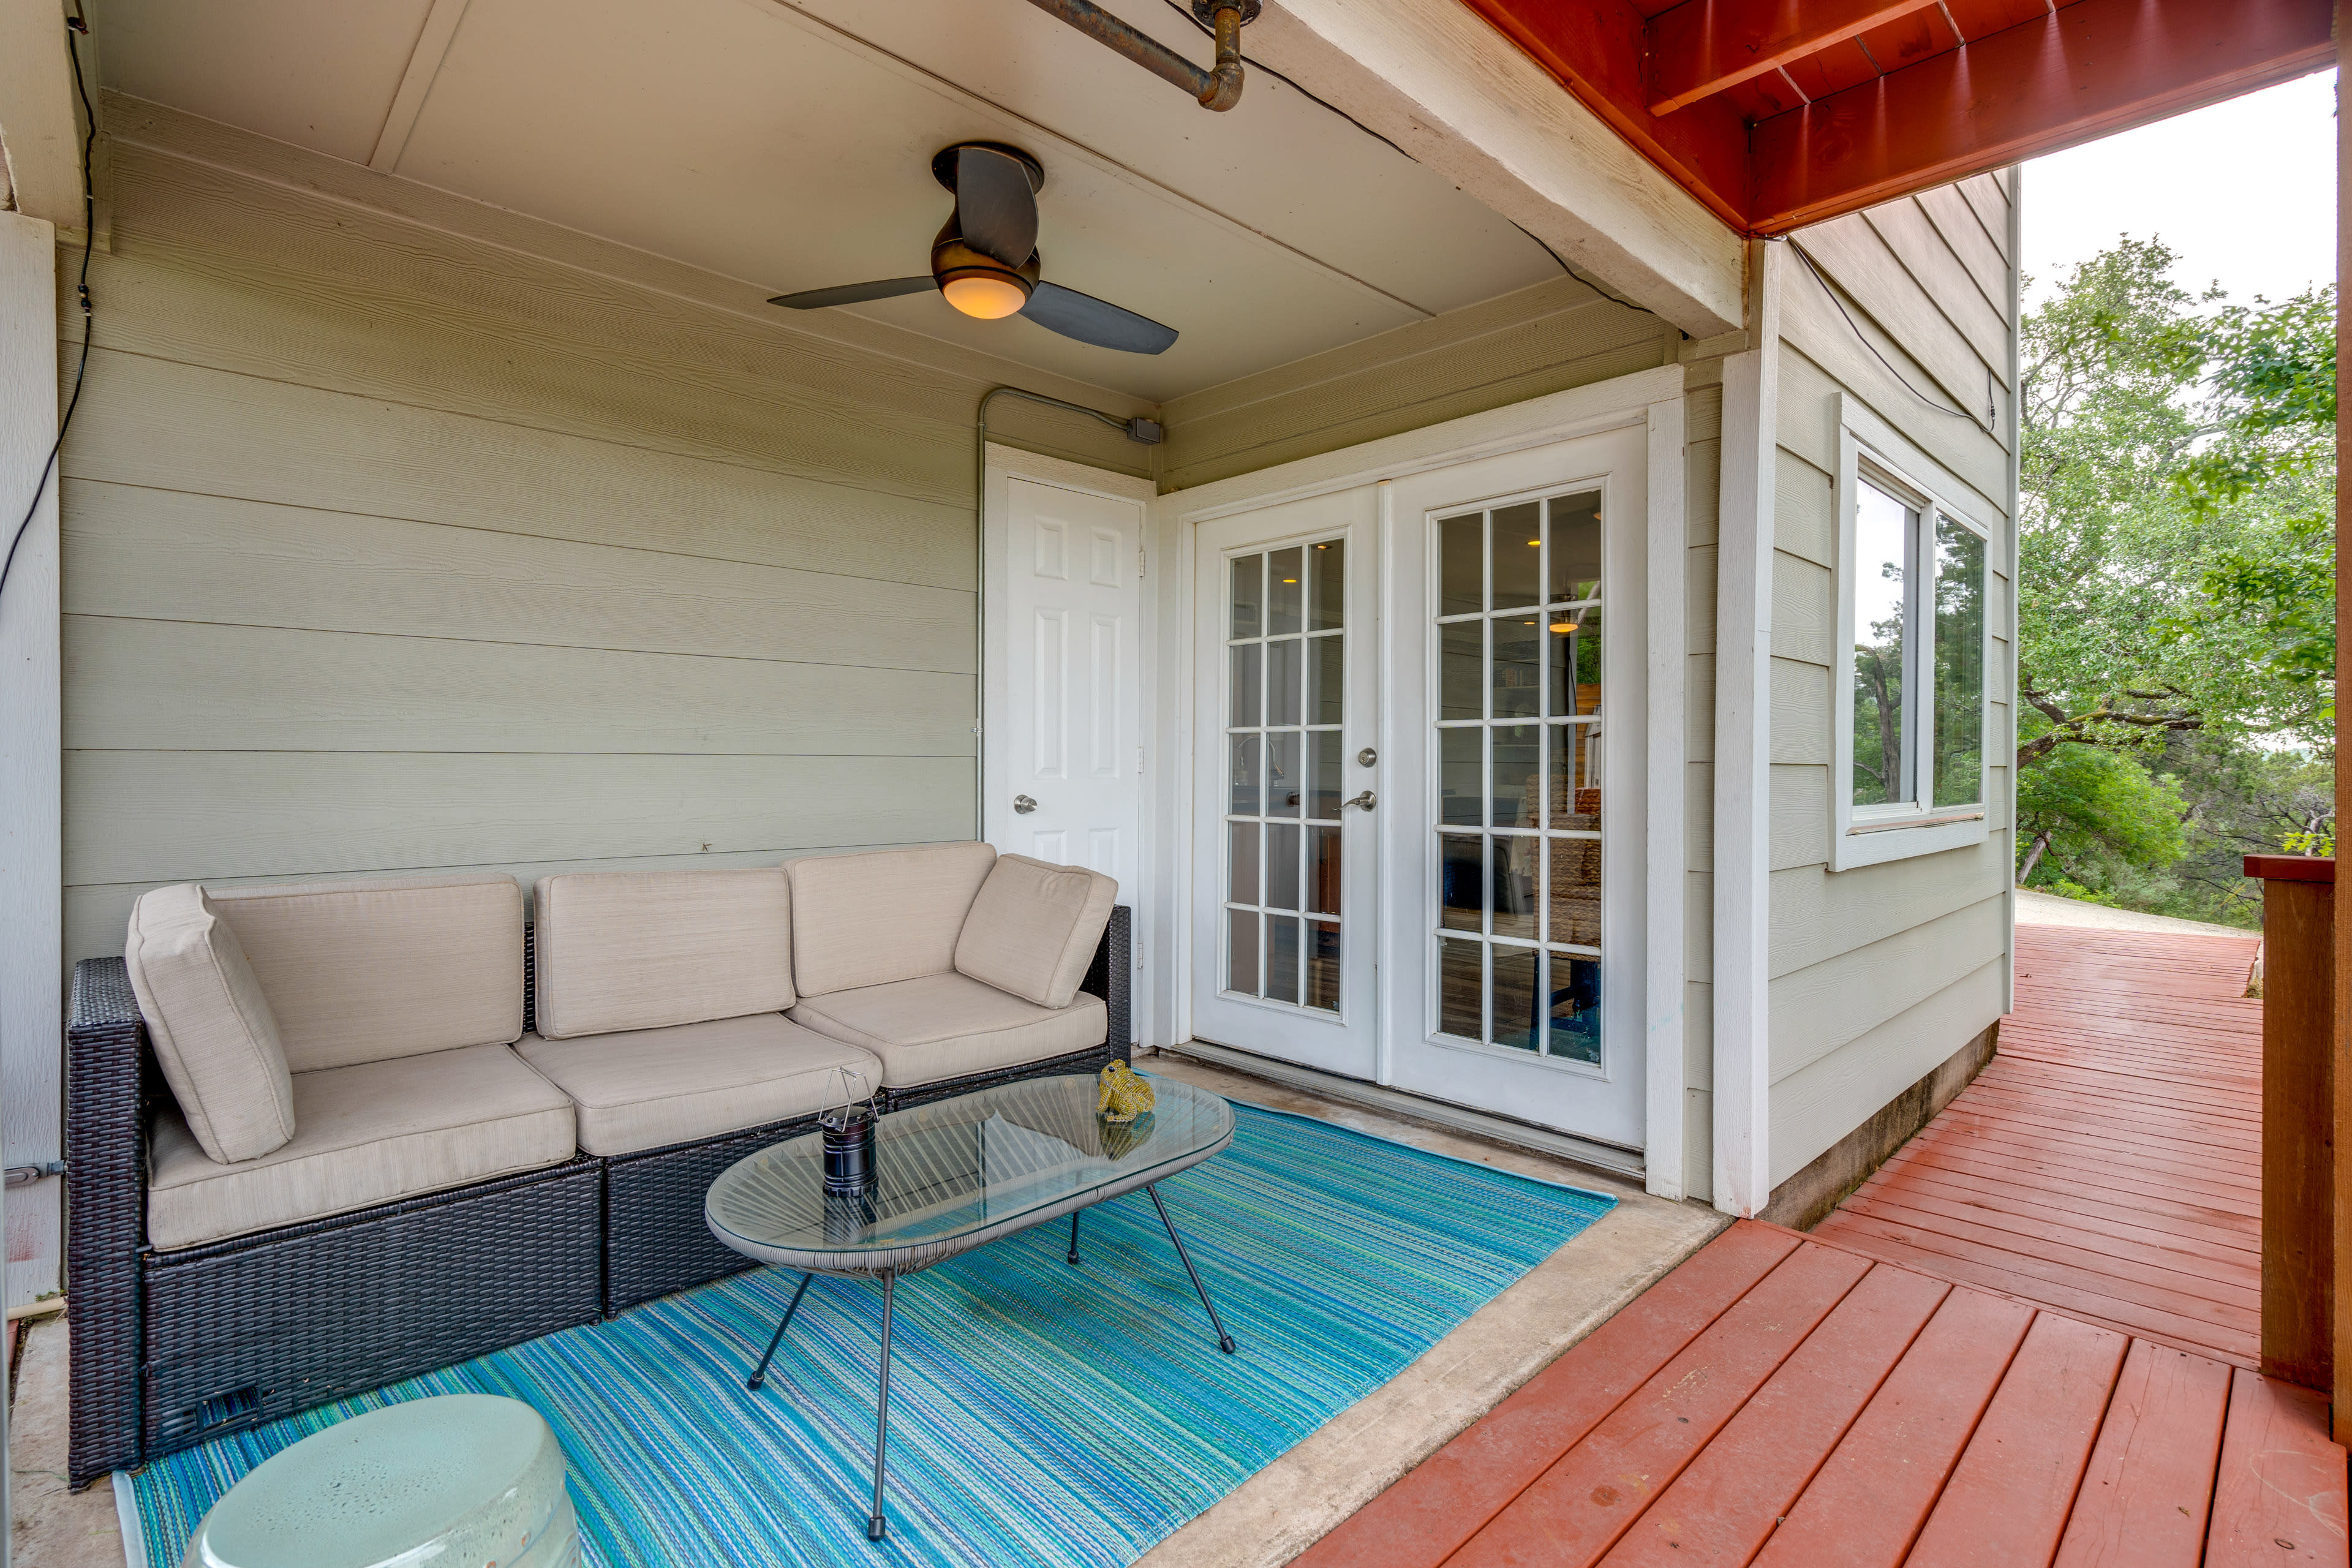 Deck | Outdoor Seating | Gas Grill